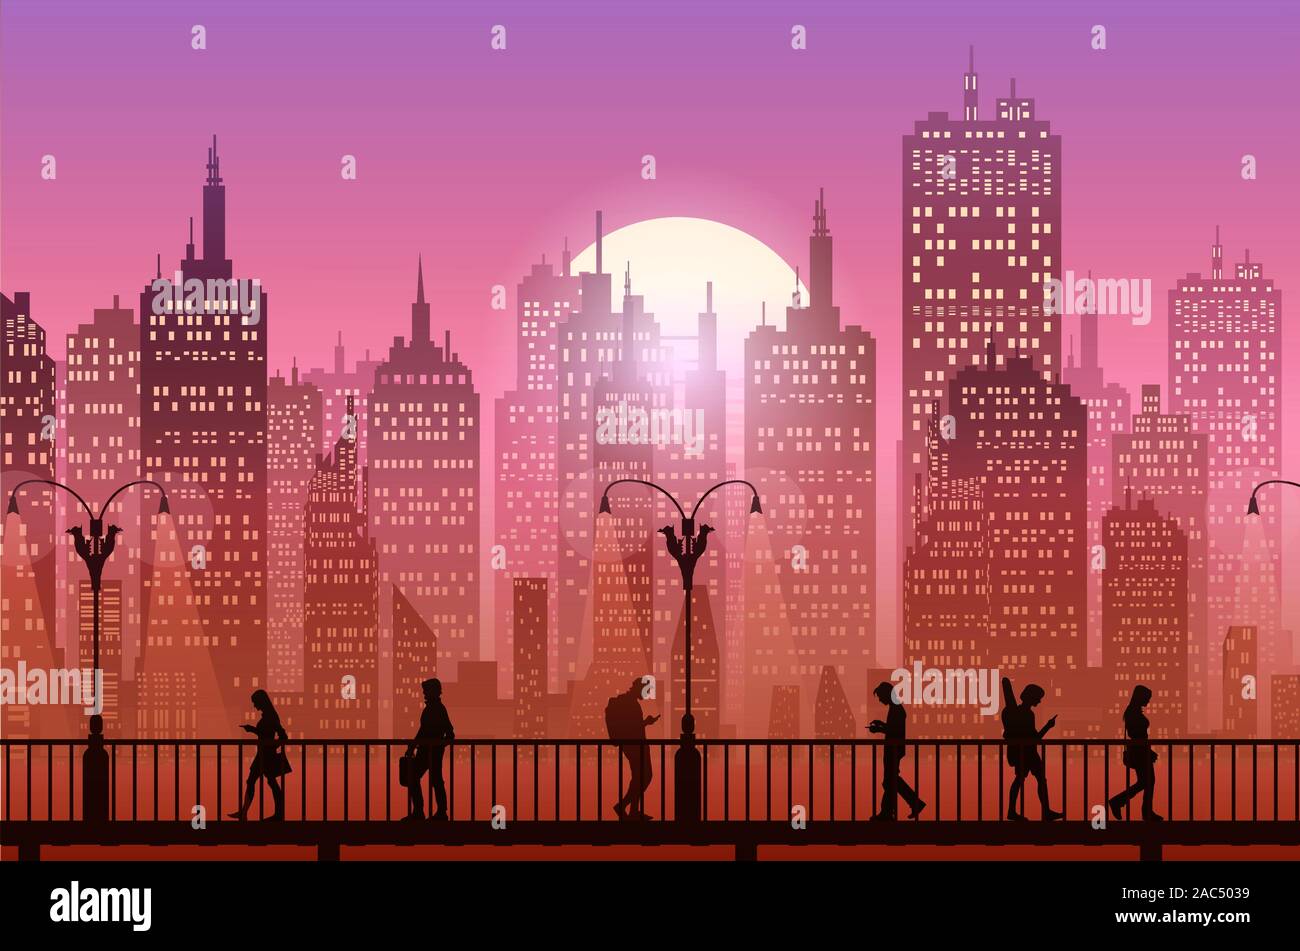 Downtown City Wallpaper In The Evening Landscape Wallpaper Sunset Illustration Vector Style Sunlight Colorful View Background Stock Vector Image Art Alamy